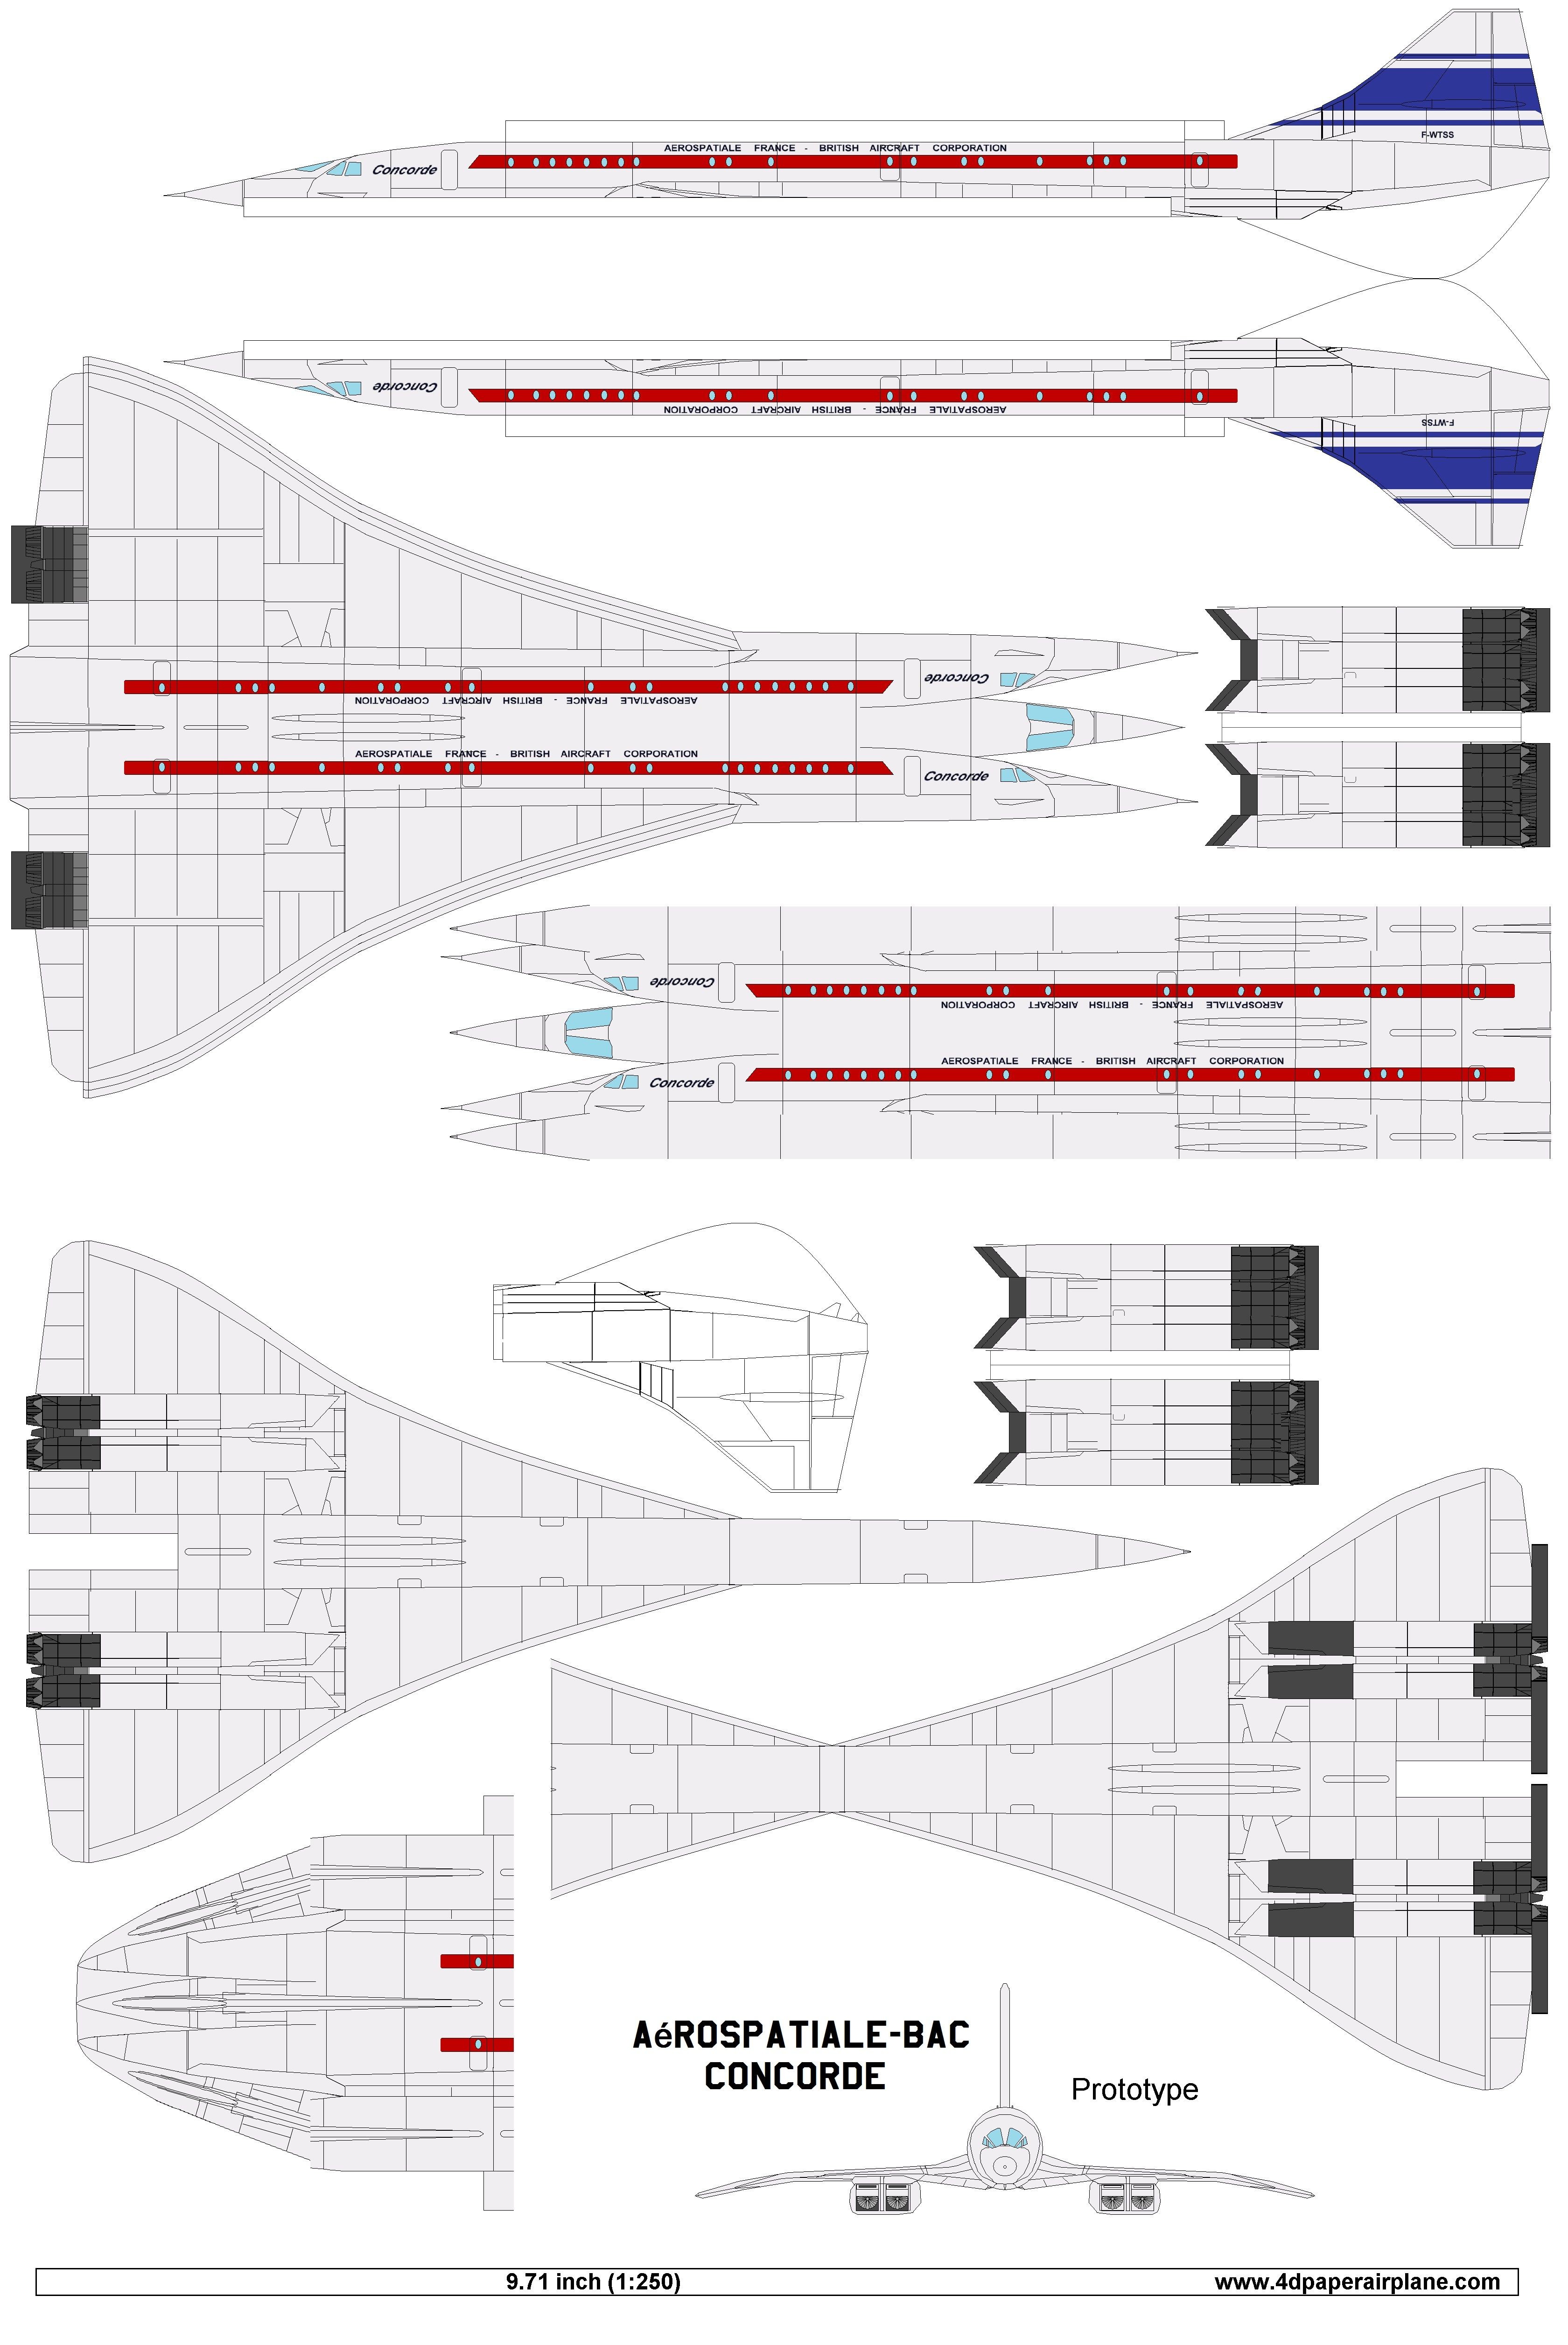 Papercraft Space Shuttle 4d Model Template Of Concorde Prototype 4dpa Concorde